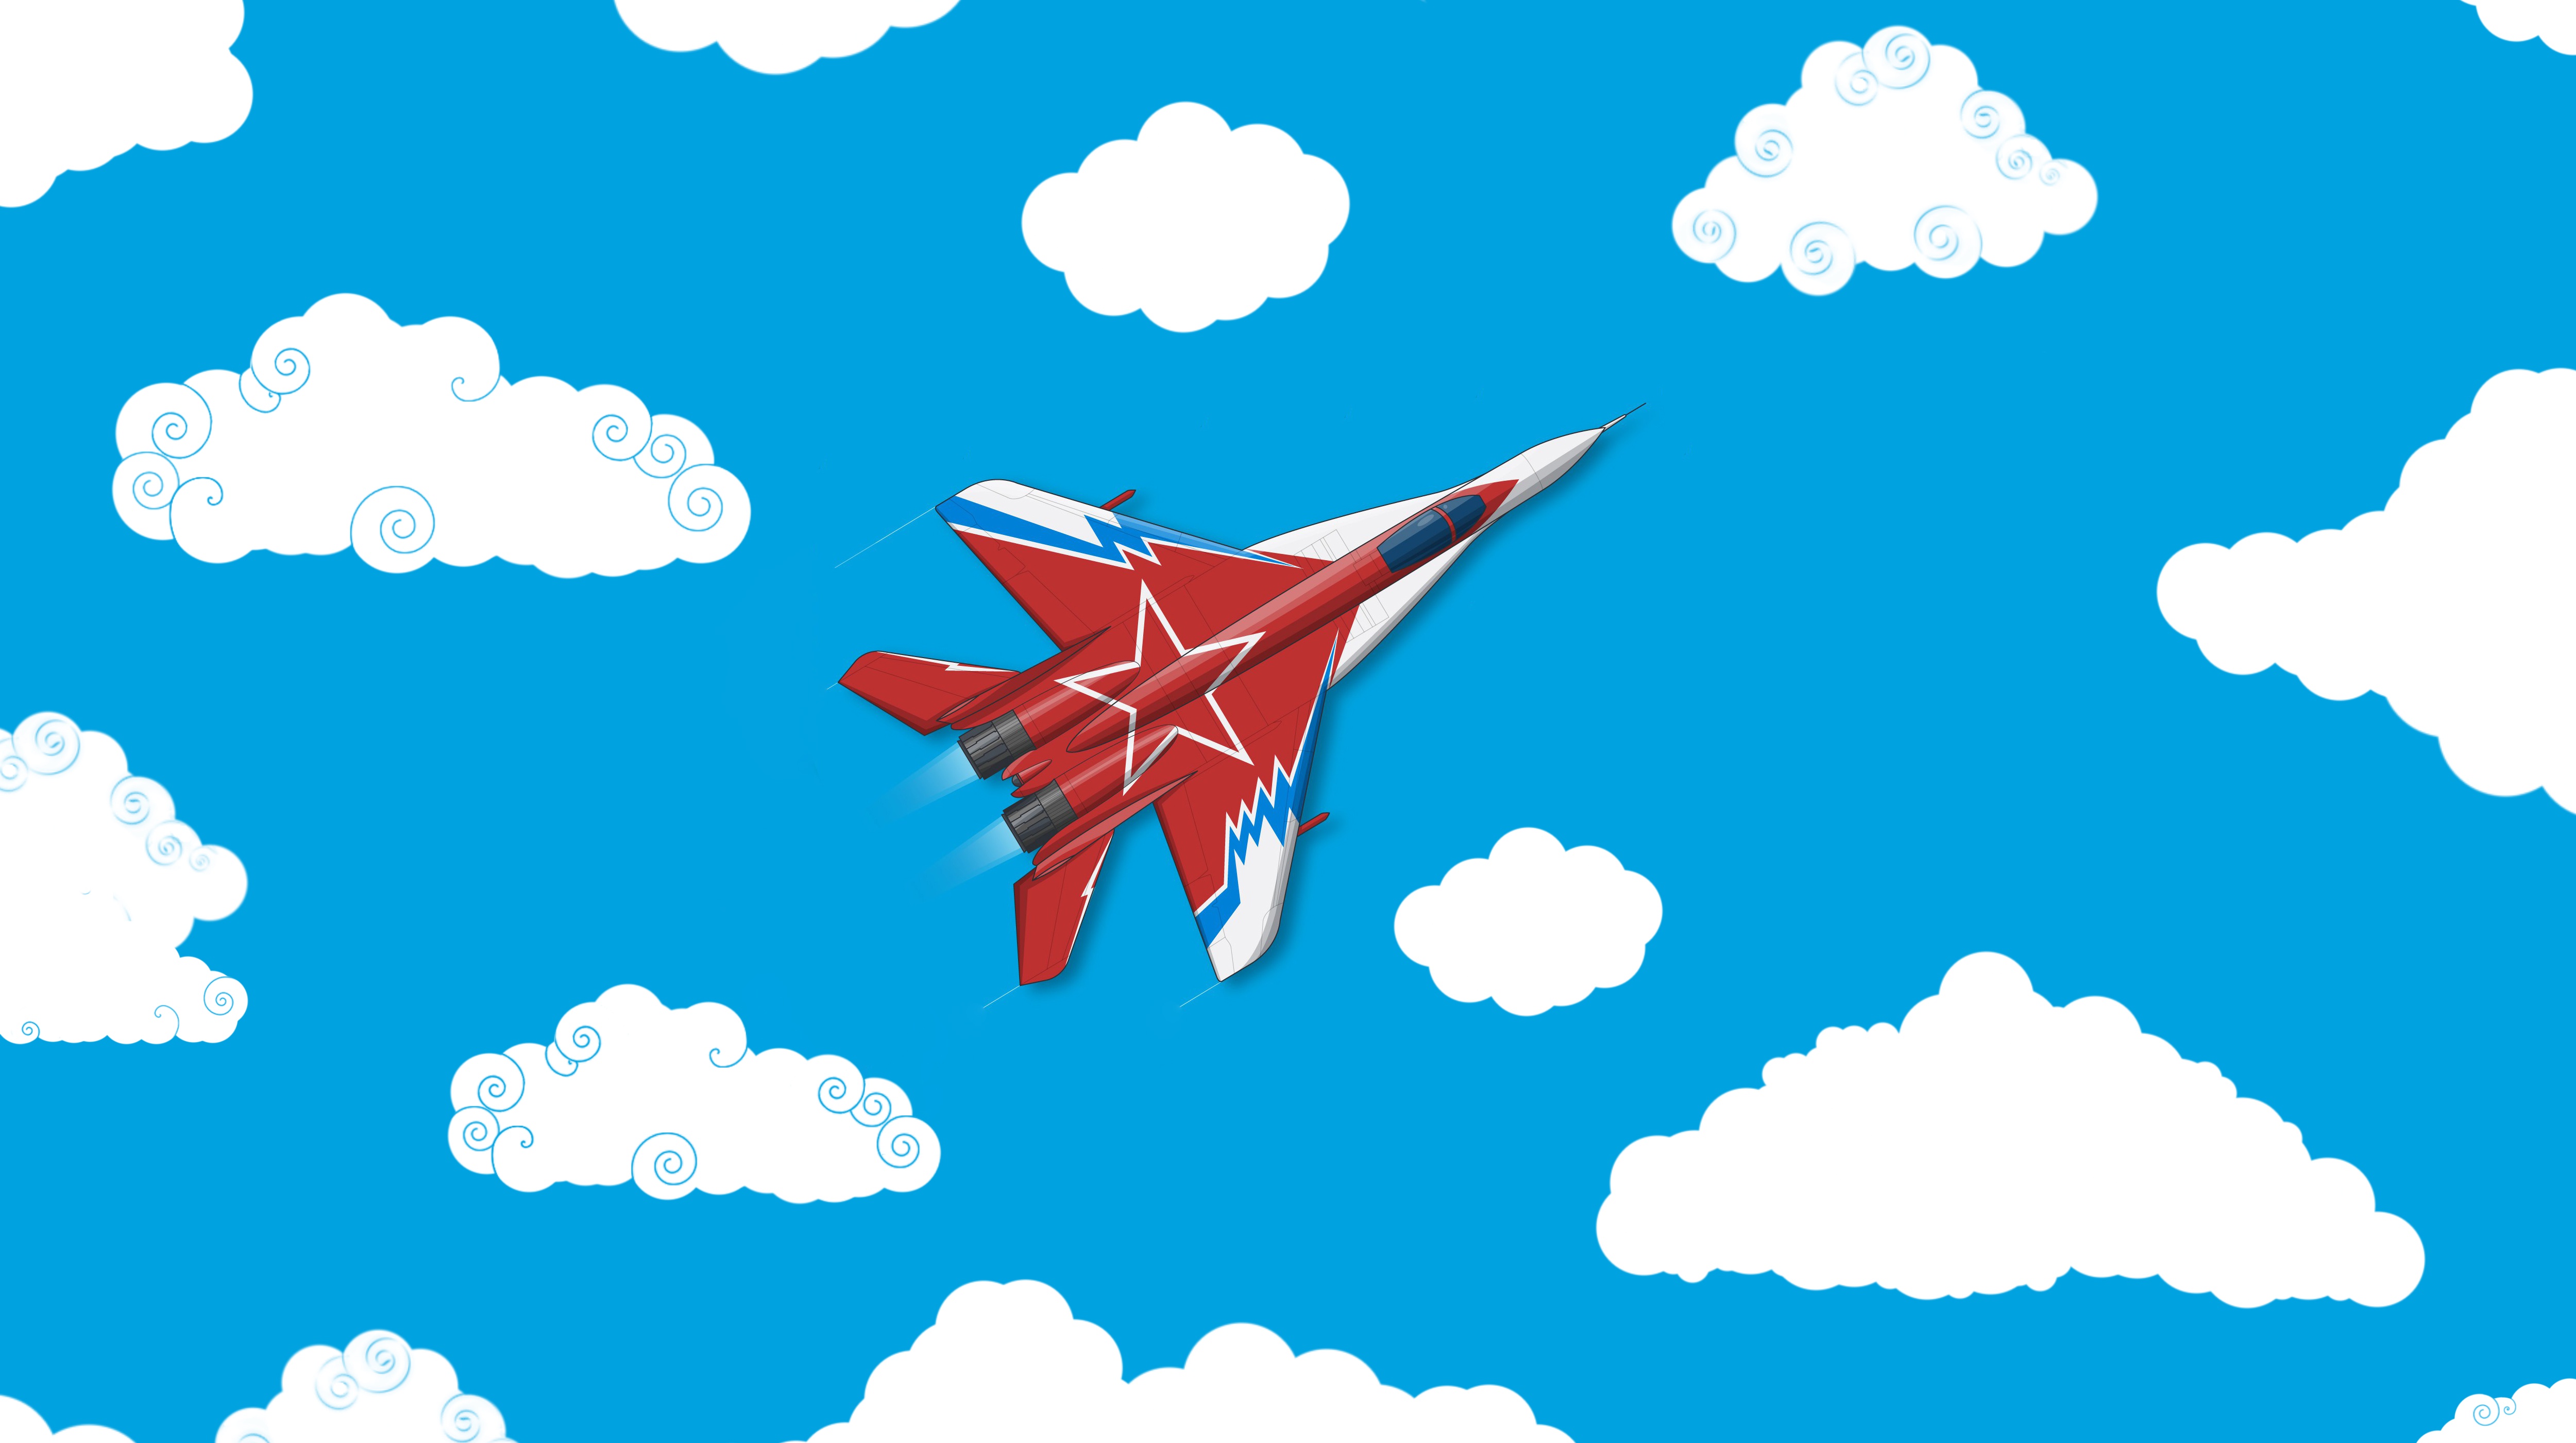 General 5000x2800 artwork military aircraft aircraft red star Mikoyan MiG-29 vehicle military vehicle military jet fighter Russian Air Force minimalism simple background airplane clouds sky